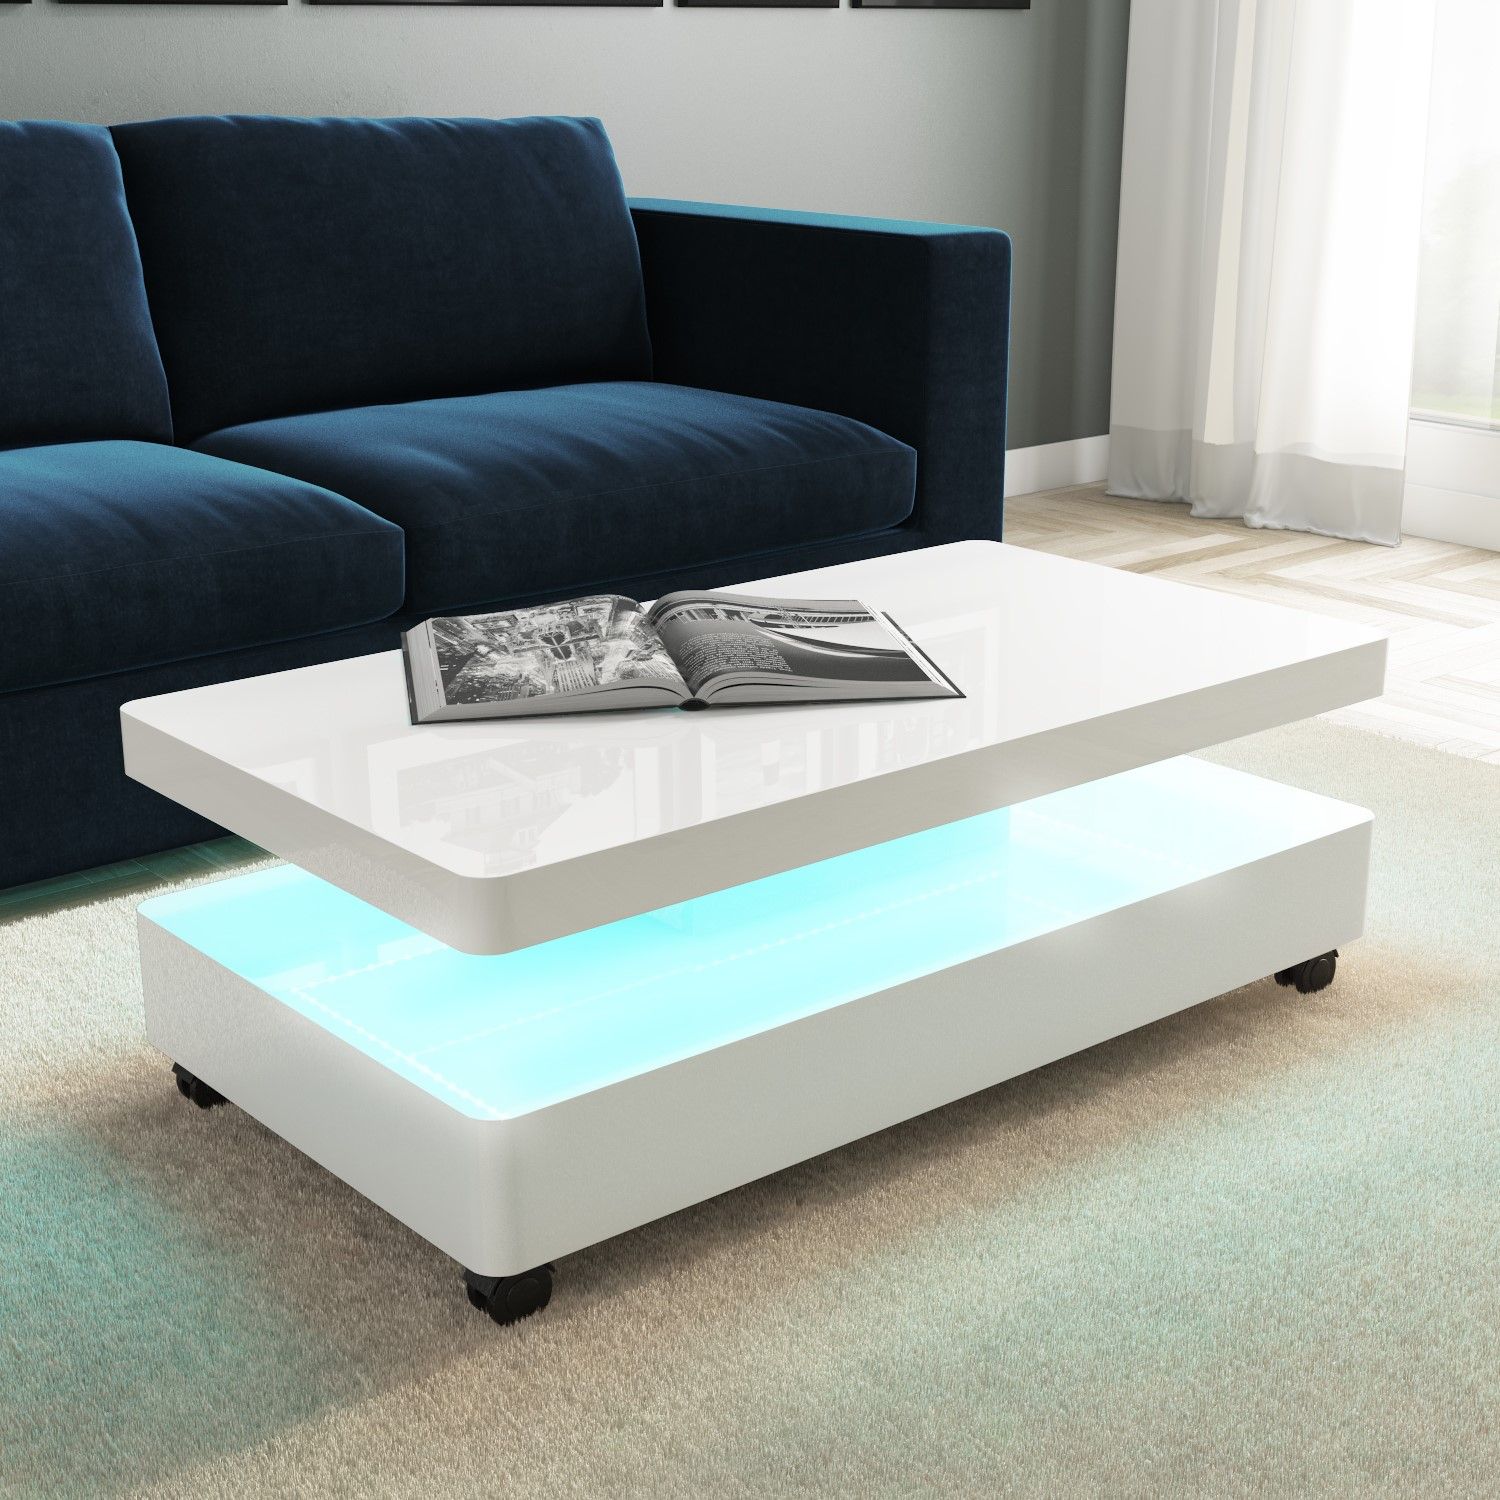 High Gloss White Coffee Table With Led Lighting 5060388562168 | Ebay In Led Coffee Tables With 4 Drawers (View 11 of 20)